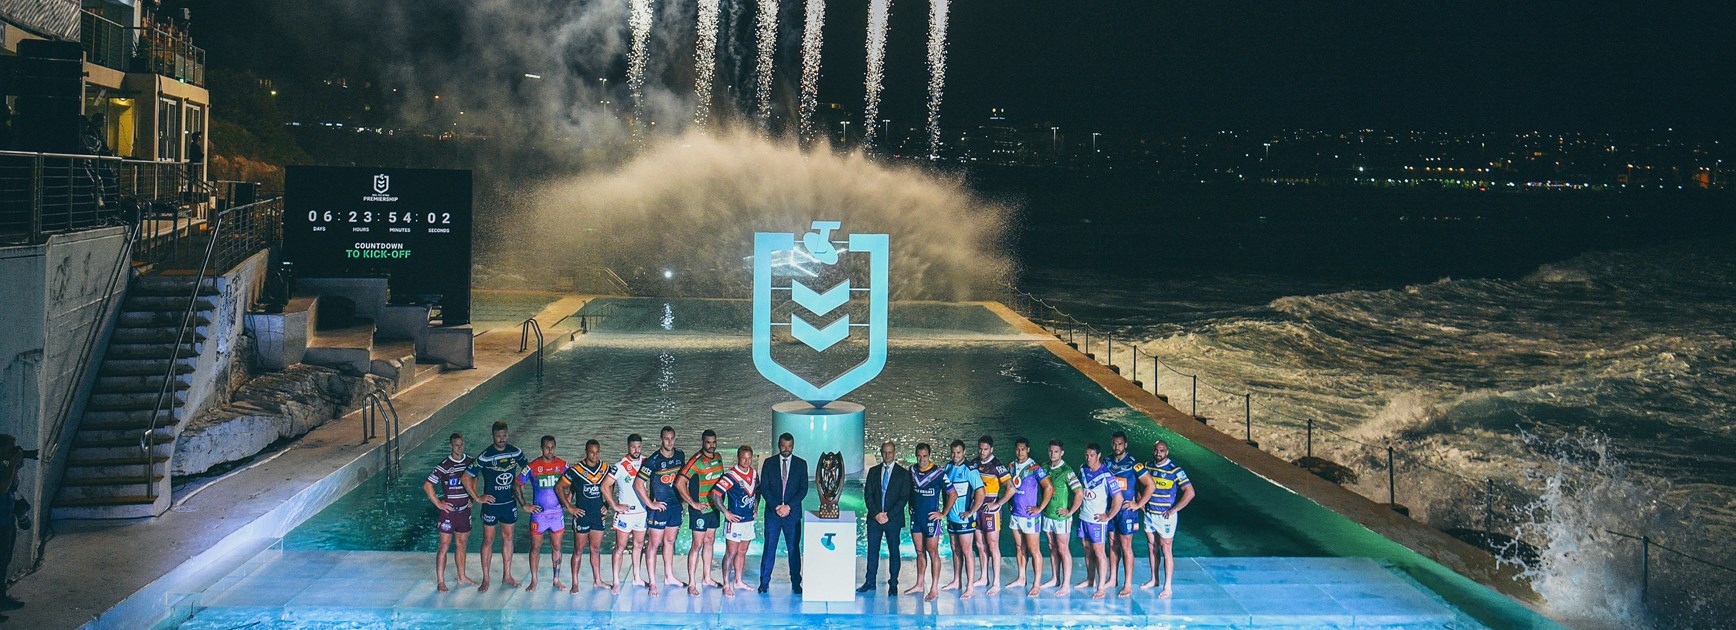 NRL Telstra Premiership 2019 season officially launched